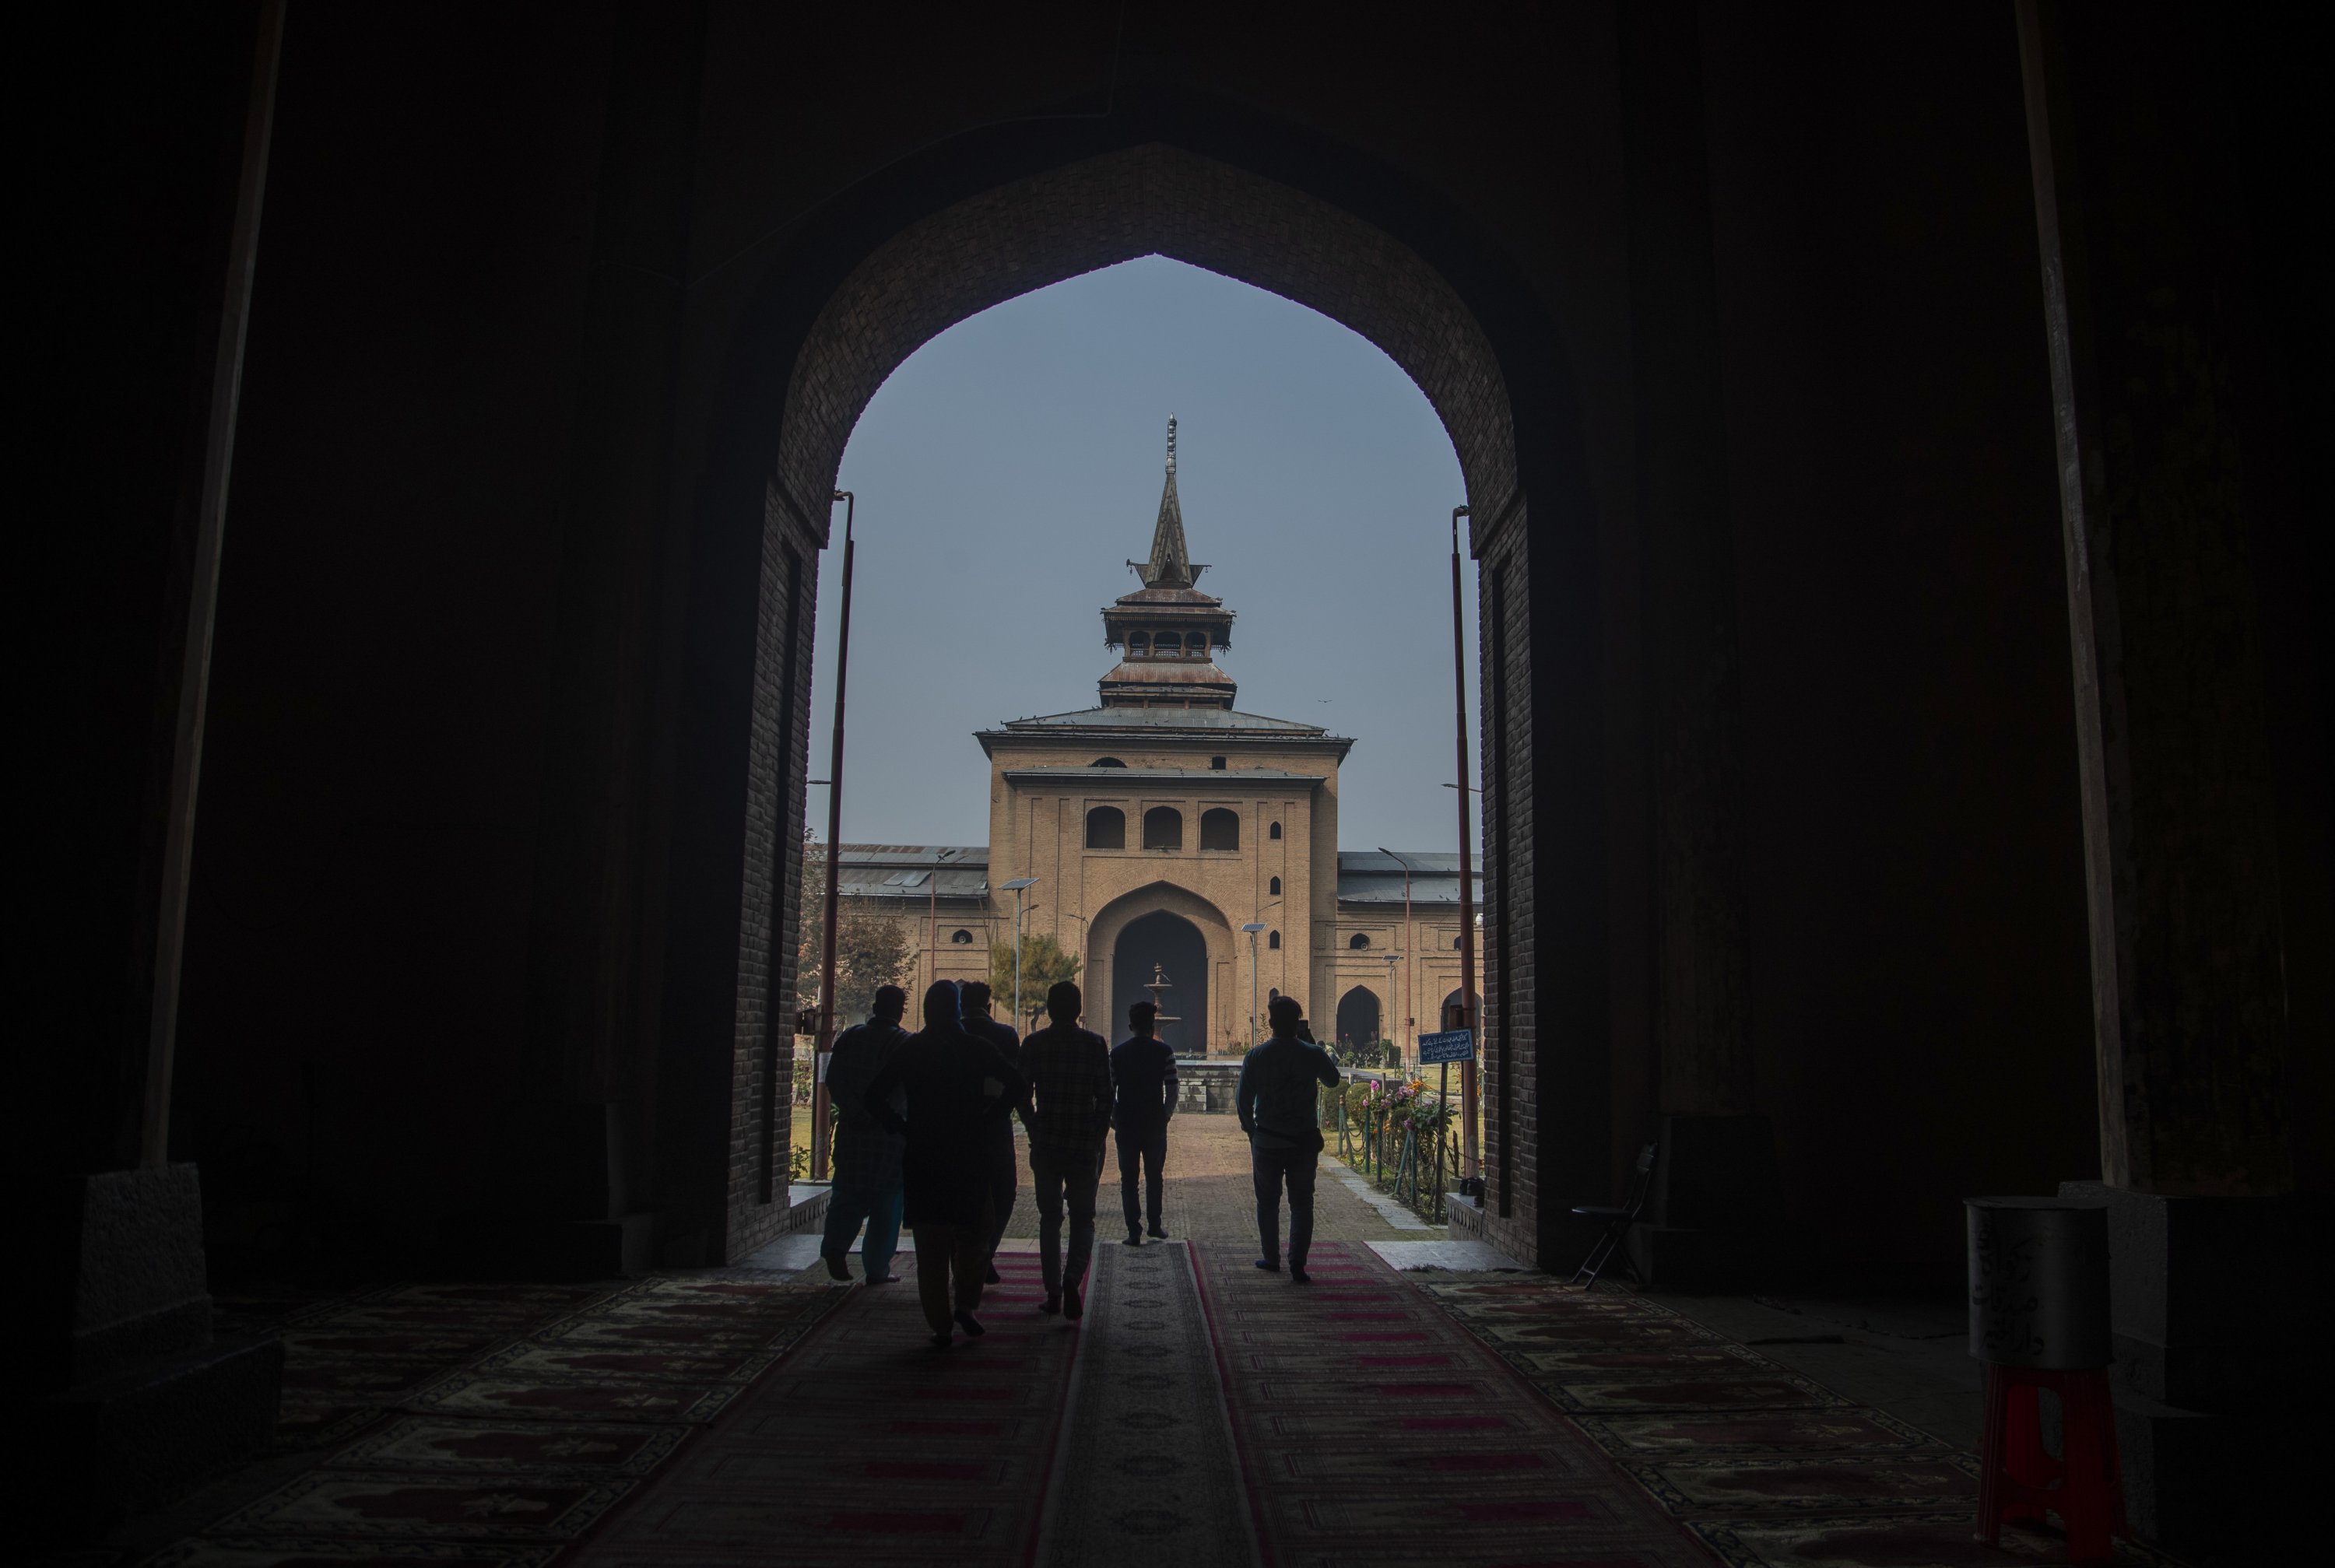 Indian tourists visit the Jamia Masjid, or the grand mosque in Srinagar, Indian-controlled Kashmir, Nov. 13, 2021. (AP Photo)